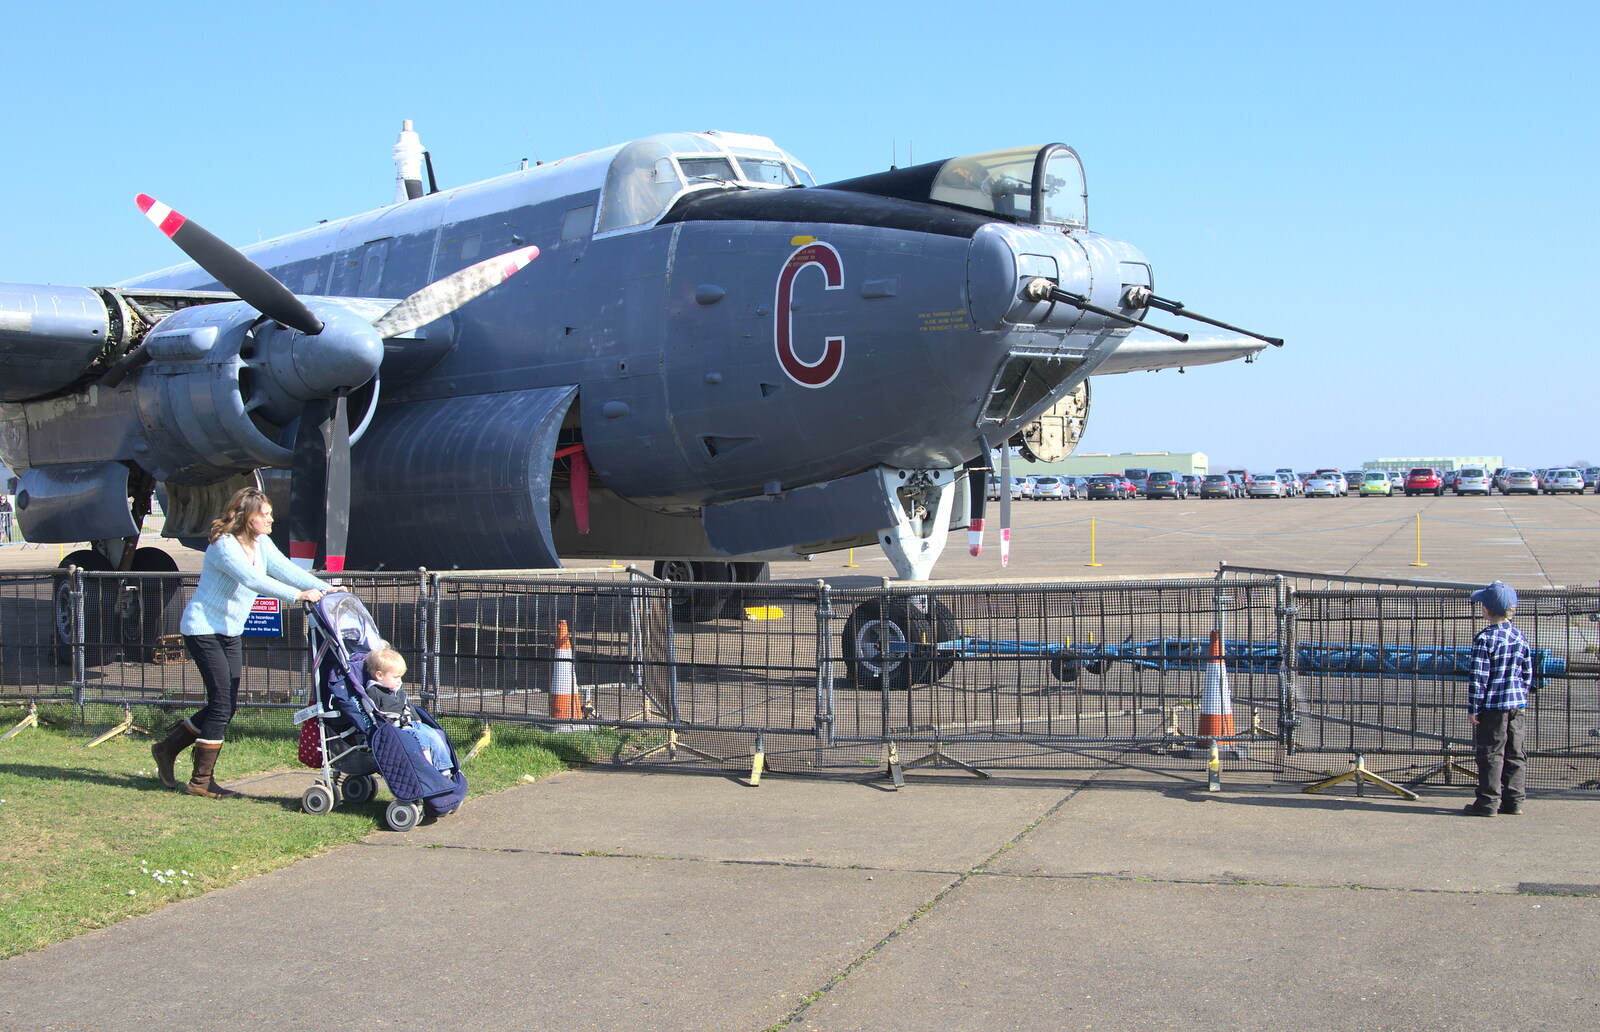 Fred looks at a Shackleton Mark 3 from A Day Out at Duxford, Cambridgeshire - 9th March 2014